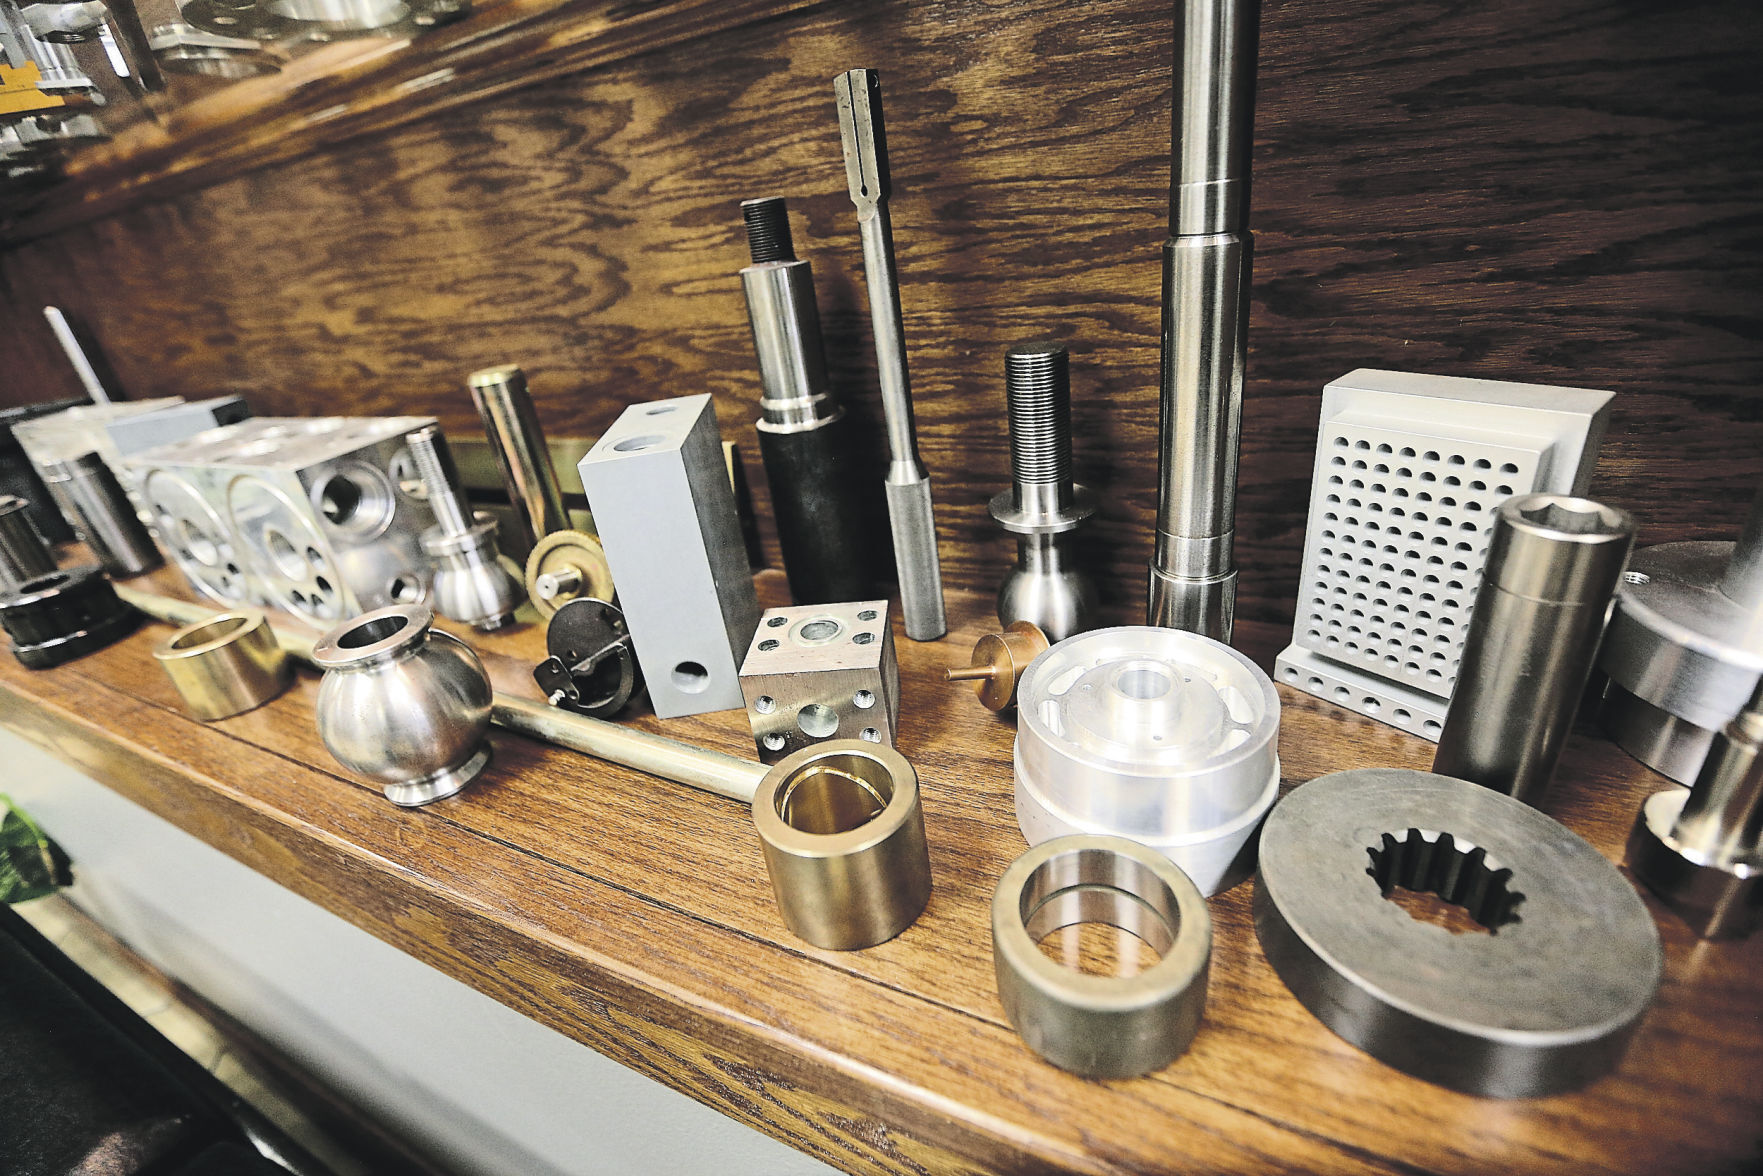 A sample of parts made at Dubuque Screw Products Inc. in Dubuque, Iowa.    PHOTO CREDIT: Dave Kettering